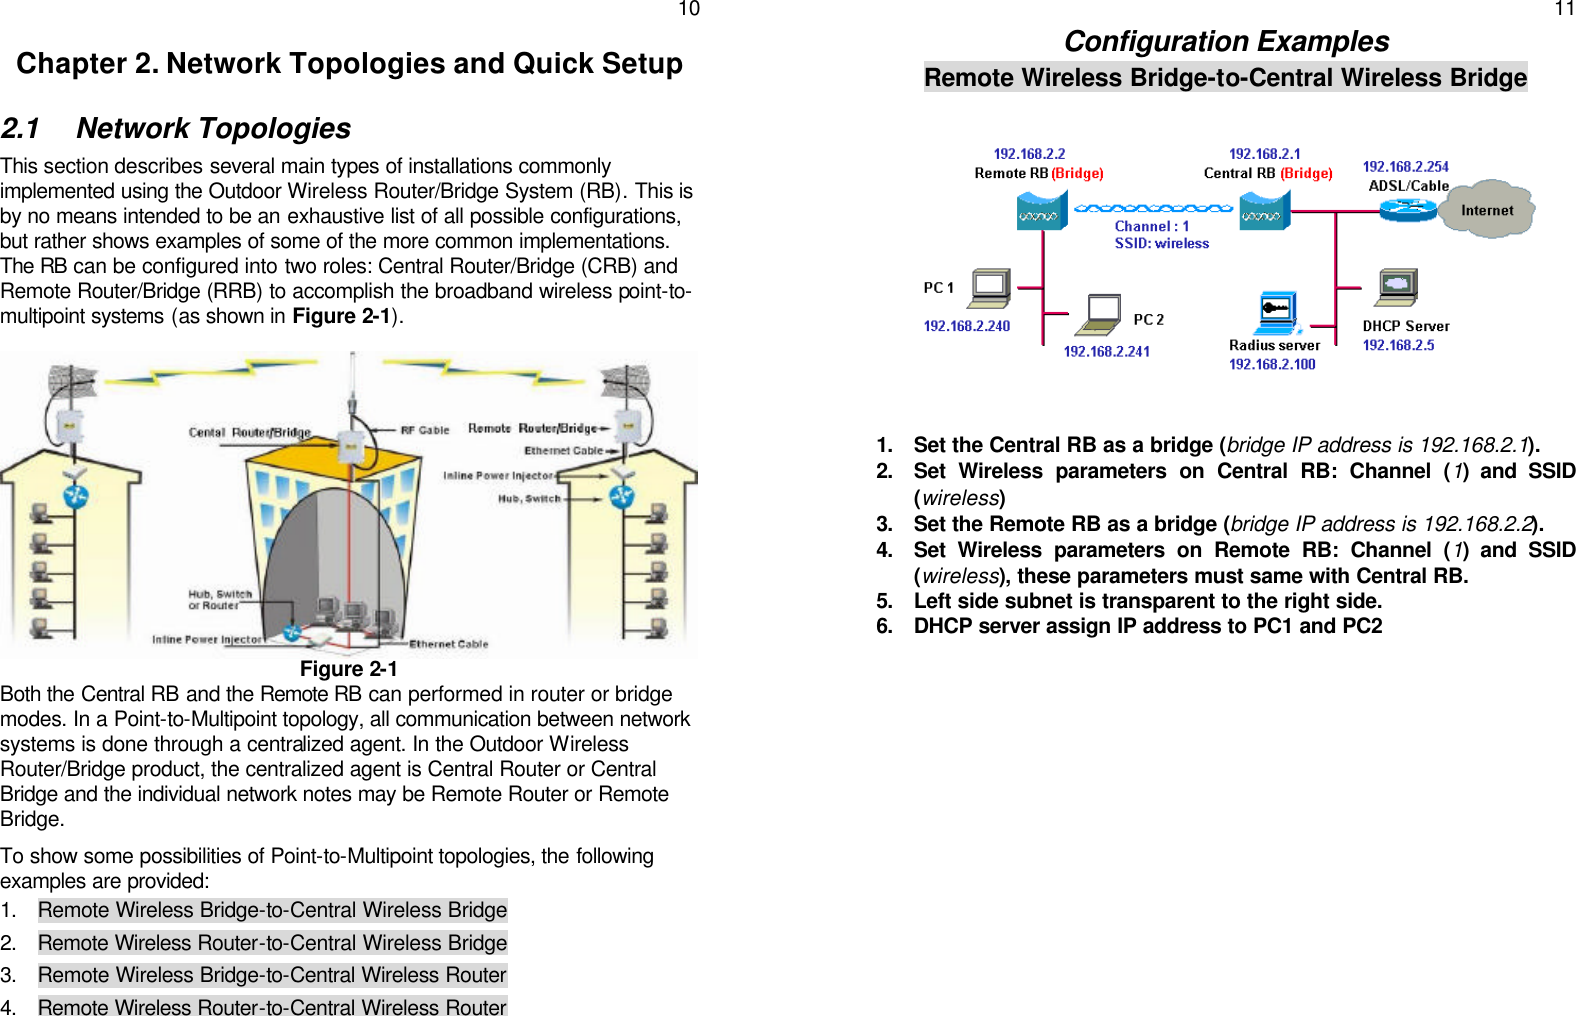   10 Chapter 2. Network Topologies and Quick Setup 2.1 Network Topologies This section describes several main types of installations commonly implemented using the Outdoor Wireless Router/Bridge System (RB). This is by no means intended to be an exhaustive list of all possible configurations, but rather shows examples of some of the more common implementations. The RB can be configured into two roles: Central Router/Bridge (CRB) and Remote Router/Bridge (RRB) to accomplish the broadband wireless point-to-multipoint systems (as shown in Figure 2-1).            Figure 2-1 Both the Central RB and the Remote RB can performed in router or bridge modes. In a Point-to-Multipoint topology, all communication between network systems is done through a centralized agent. In the Outdoor Wireless Router/Bridge product, the centralized agent is Central Router or Central Bridge and the individual network notes may be Remote Router or Remote Bridge. To show some possibilities of Point-to-Multipoint topologies, the following examples are provided: 1. Remote Wireless Bridge-to-Central Wireless Bridge  2. Remote Wireless Router-to-Central Wireless Bridge 3. Remote Wireless Bridge-to-Central Wireless Router 4. Remote Wireless Router-to-Central Wireless Router    11 Configuration Examples Remote Wireless Bridge-to-Central Wireless Bridge  1. Set the Central RB as a bridge (bridge IP address is 192.168.2.1). 2. Set Wireless parameters on Central RB: Channel (1) and SSID (wireless) 3. Set the Remote RB as a bridge (bridge IP address is 192.168.2.2). 4. Set Wireless parameters on Remote RB: Channel (1) and SSID (wireless), these parameters must same with Central RB. 5. Left side subnet is transparent to the right side. 6. DHCP server assign IP address to PC1 and PC2    